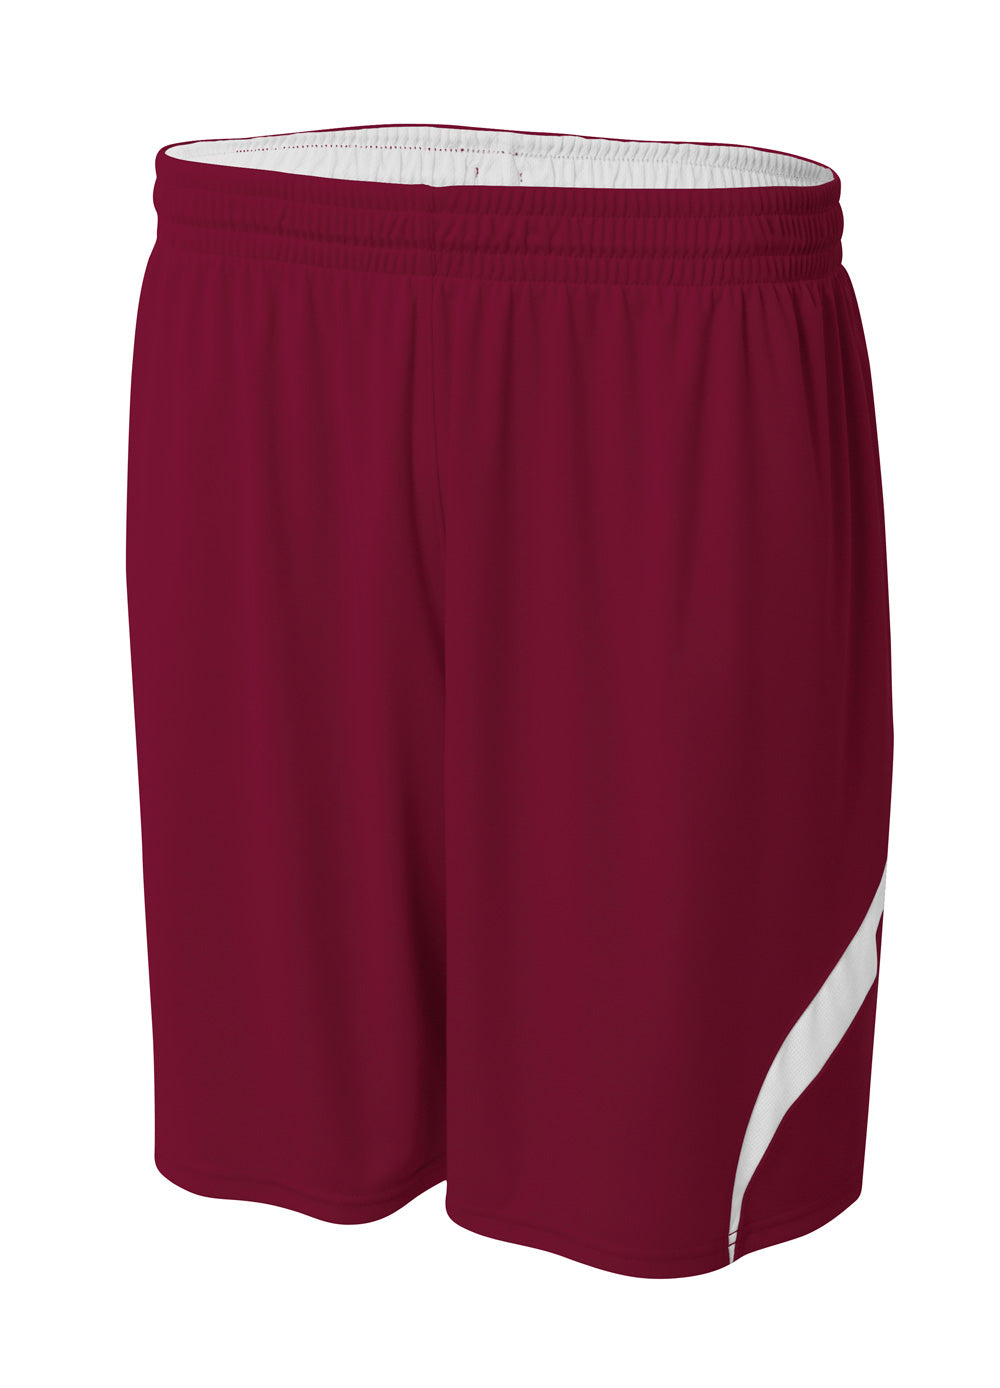 Maroon White A4 Double Double Short